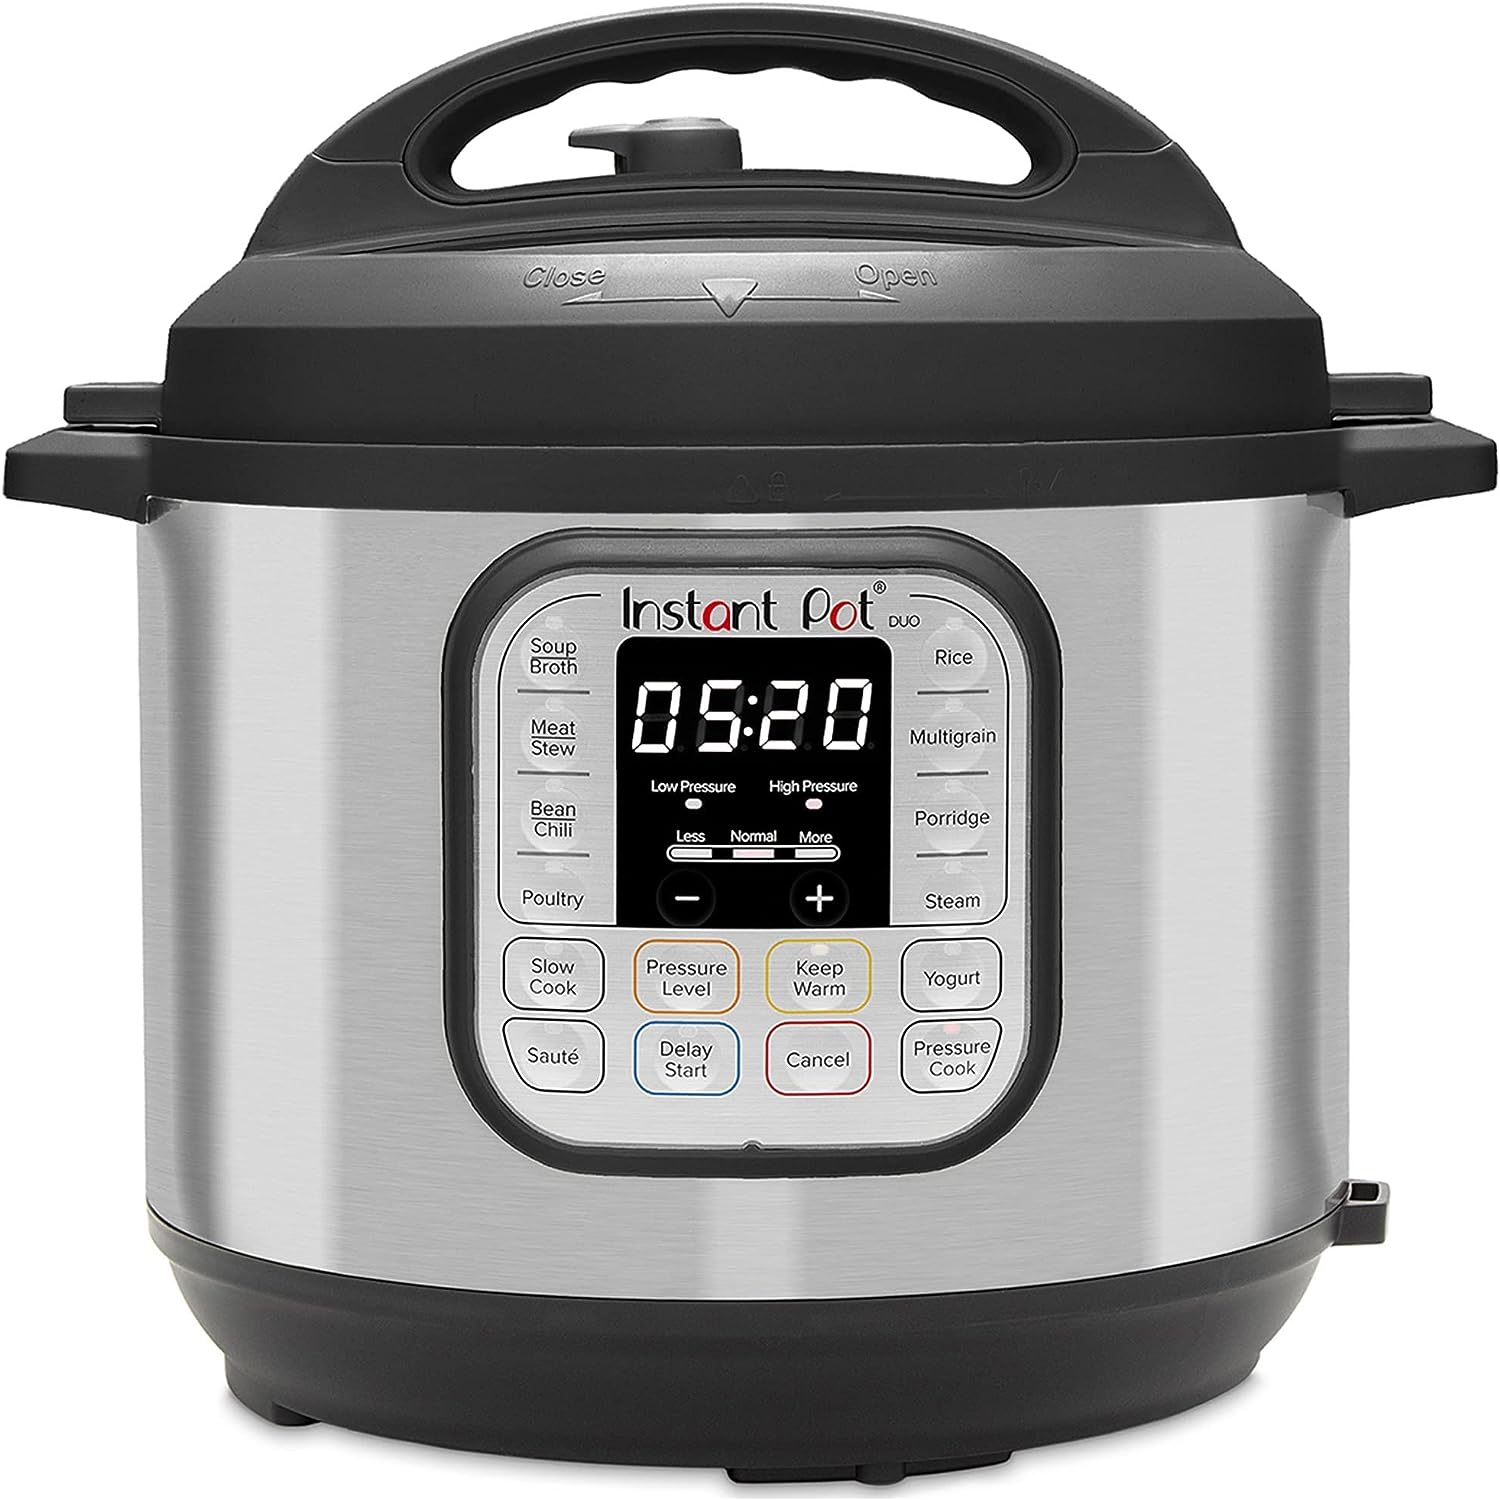 How To Use Instant Pot IP-Duo80 7-In-1 To Make Yogurt In An Electric Pressure Cooker